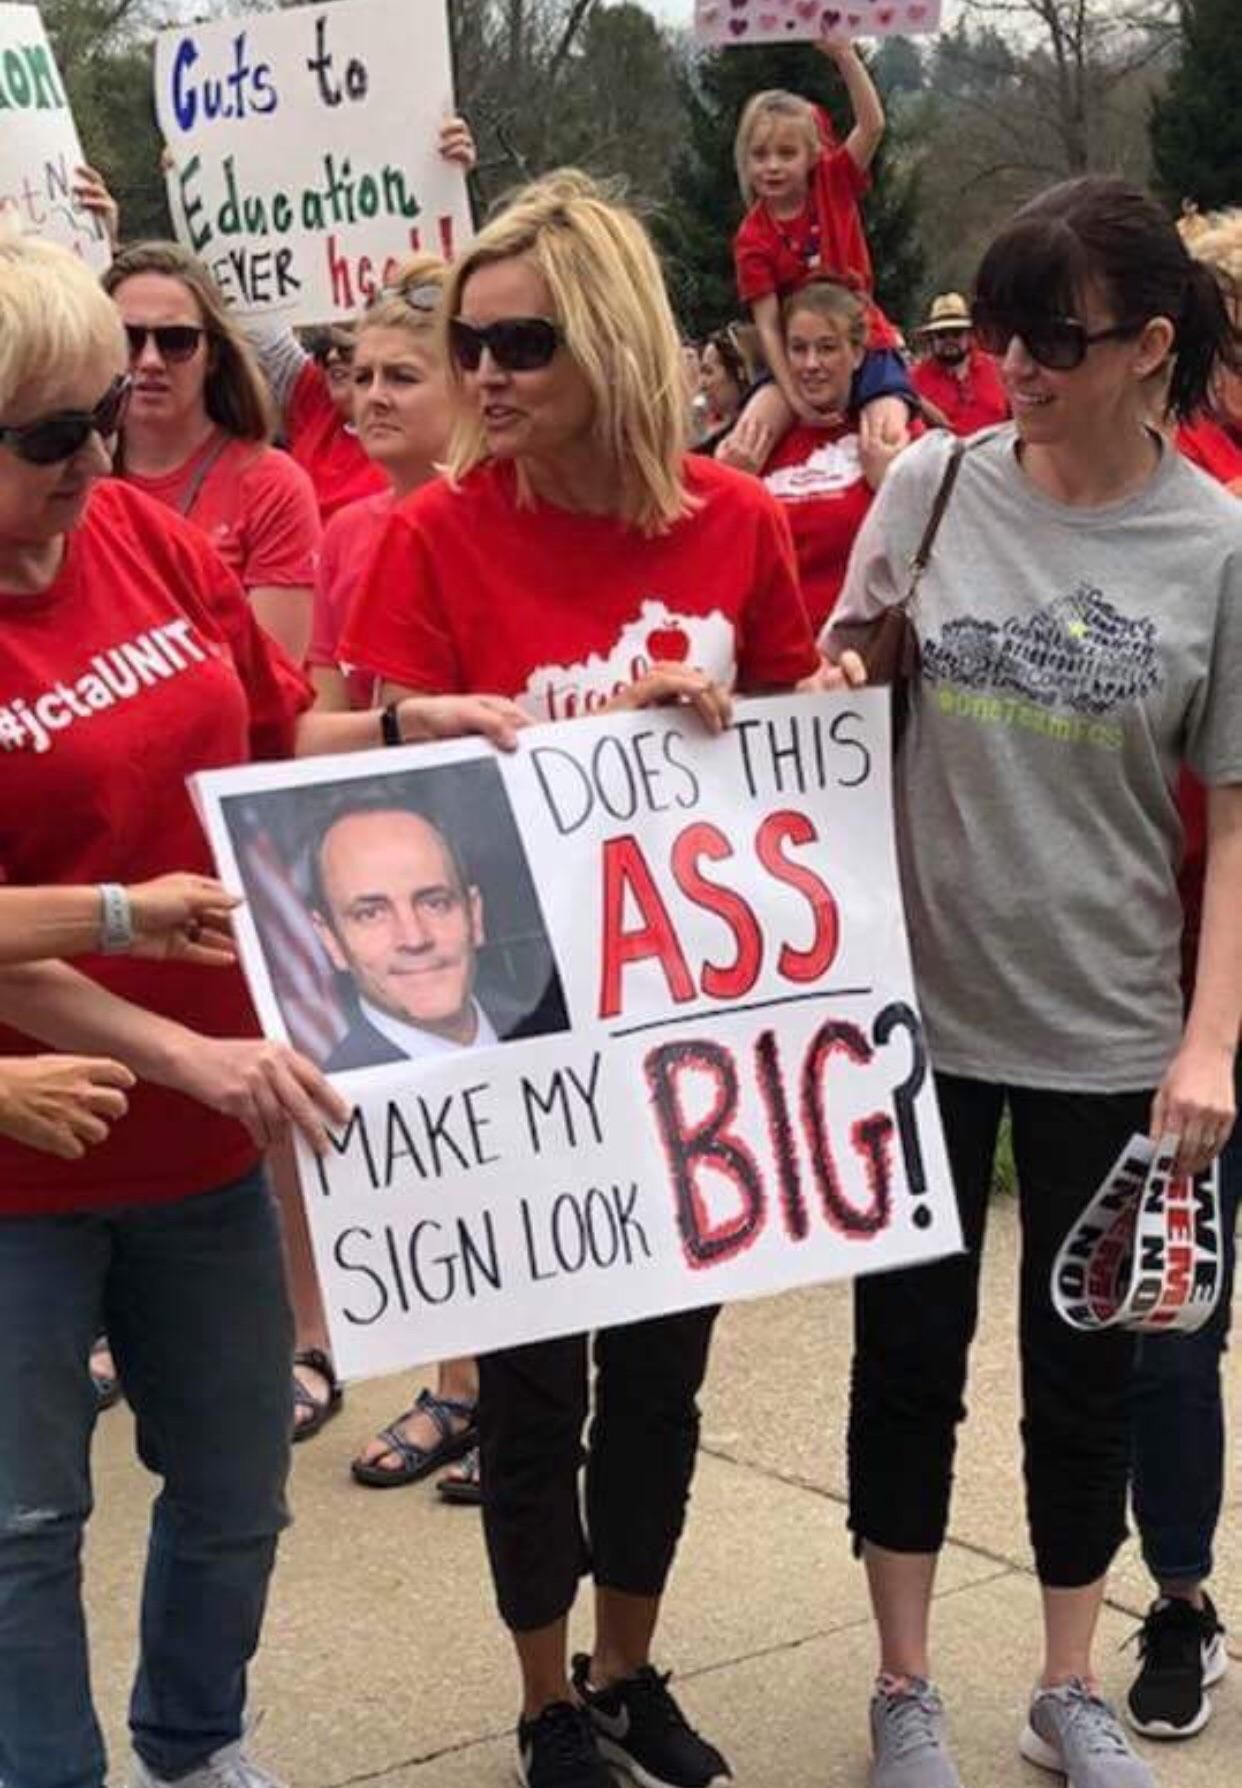 Saw this sign from the teachers’ rally in Kentucky, thought it was hilarious.